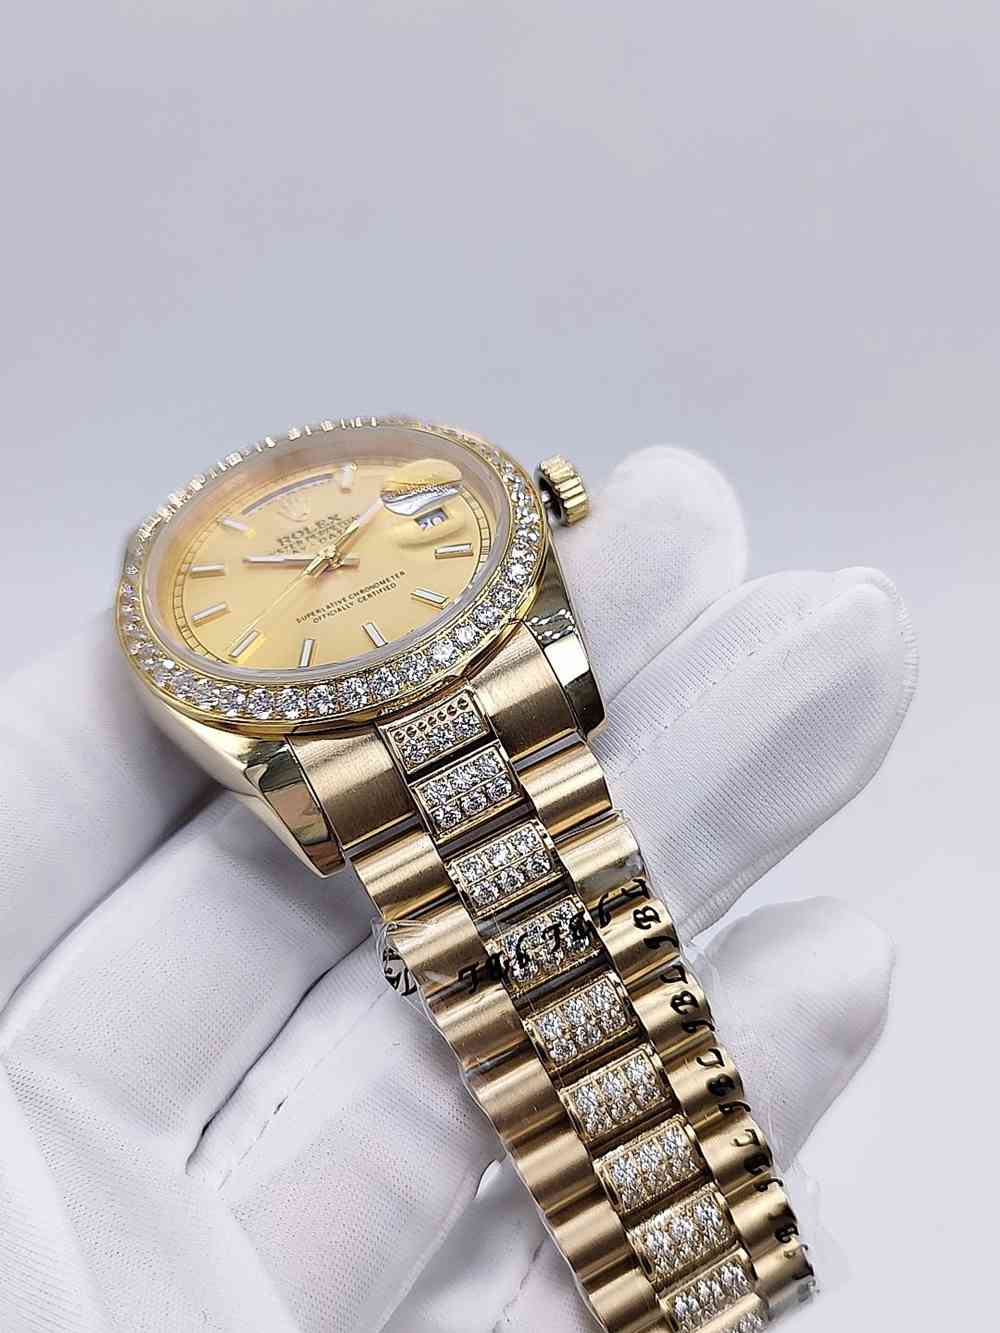 DayDate 36mm gold case diamonds president bracelets gold/white/black/green dials AAA automatic 2813 S040